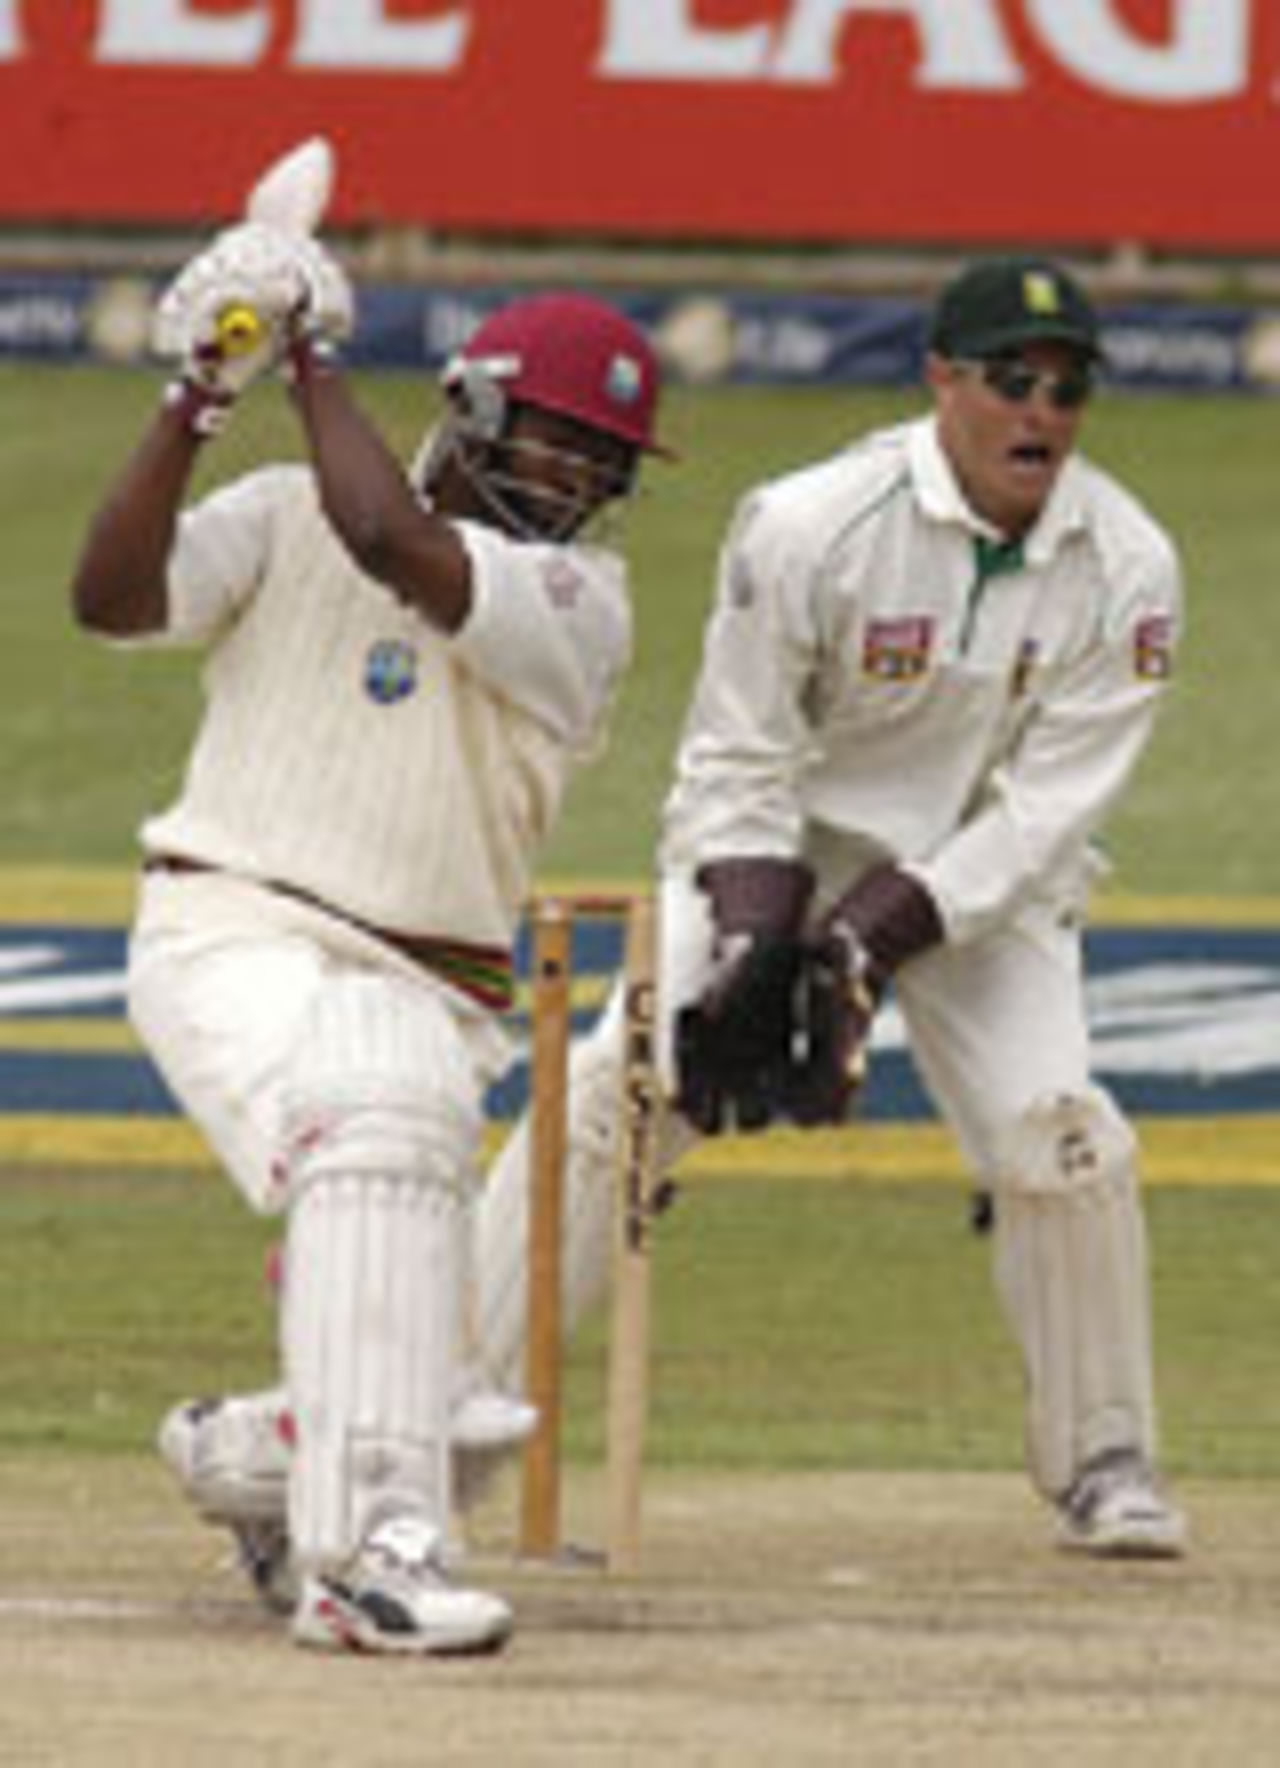 Brian Lara drives, South Africa v West Indies, 3rd Test, Cape Town, January 6, 2003